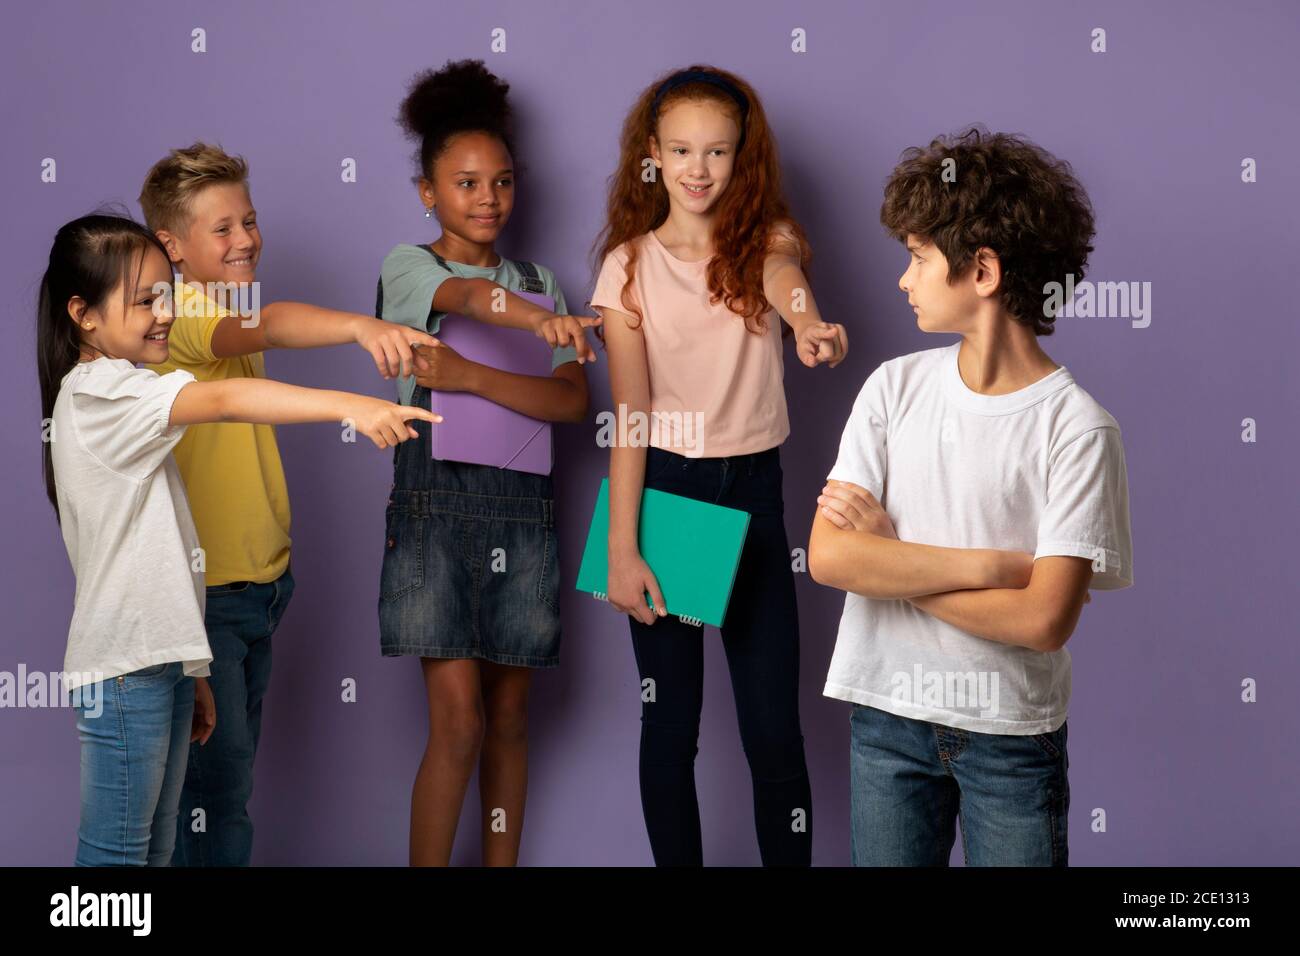 Vicious schoolkids bullying their upset classmate on violet background Stock Photo